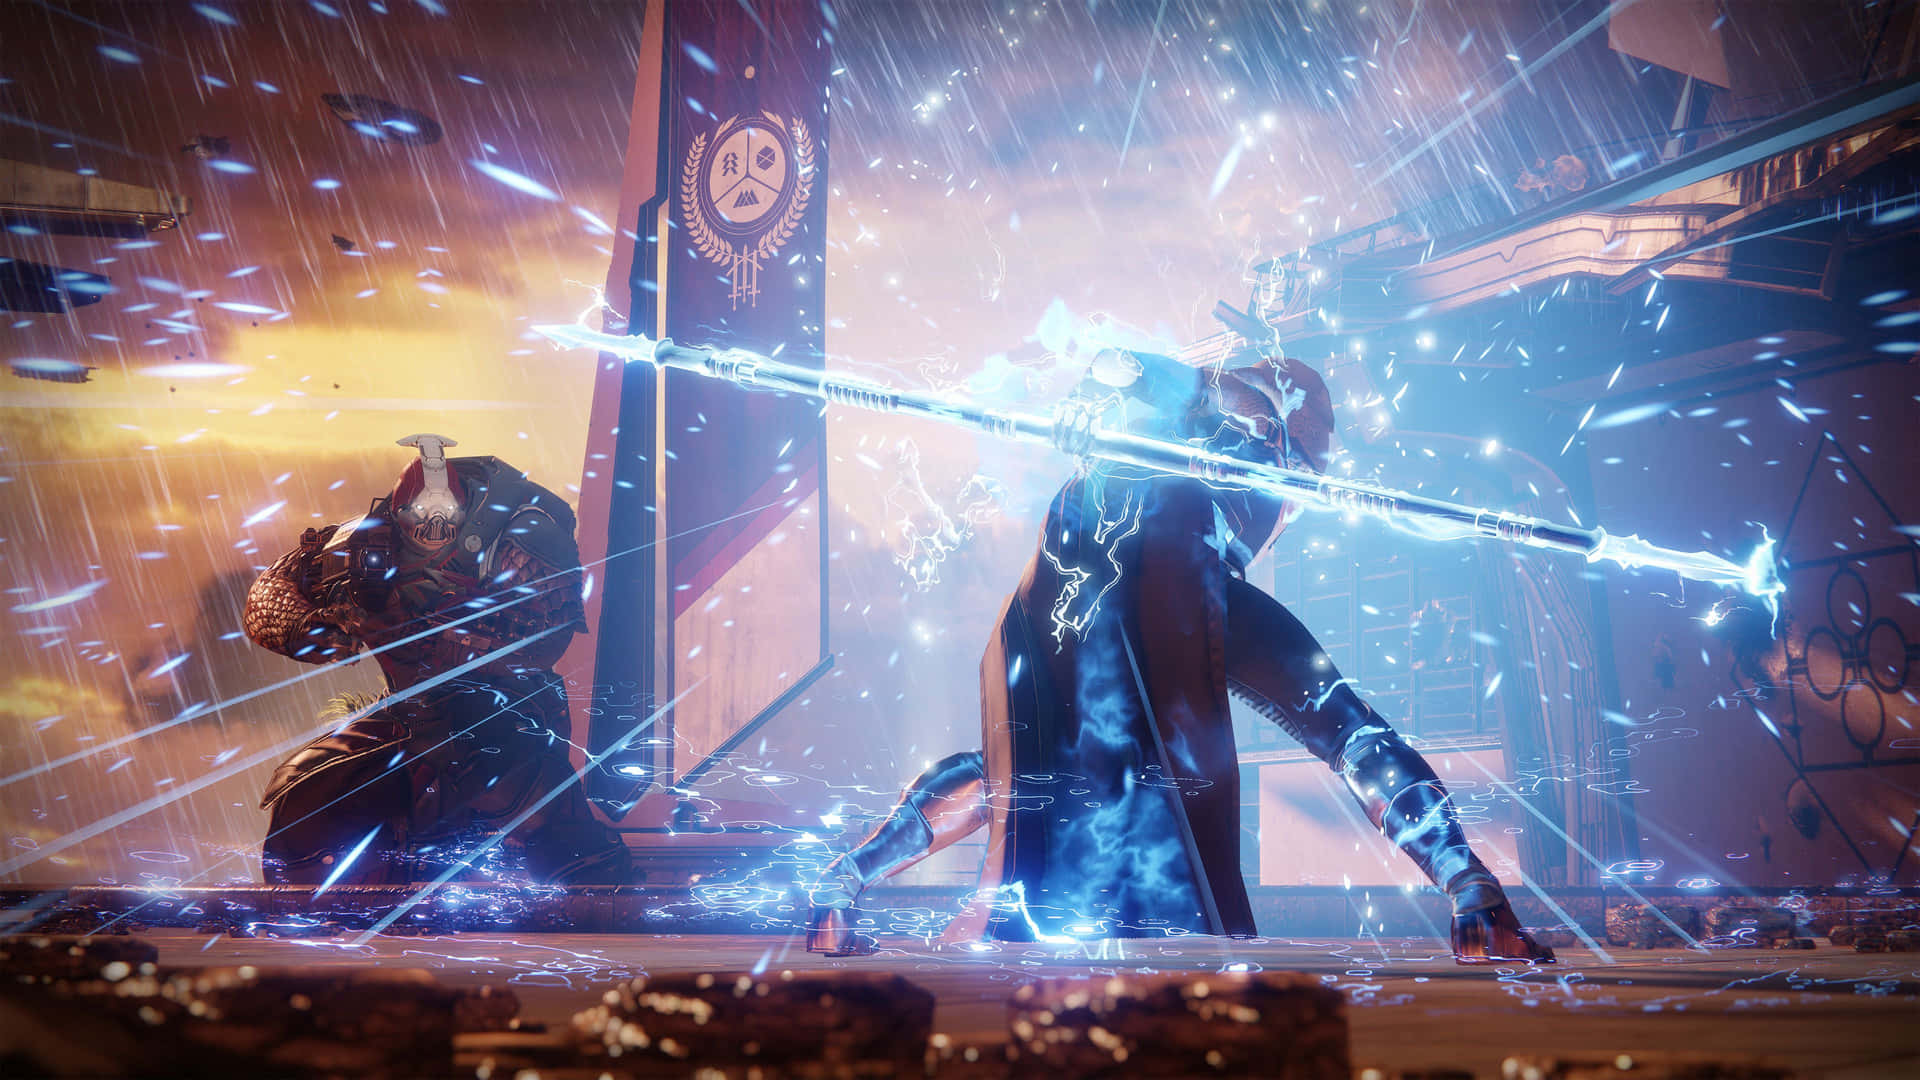 Gear up for interplanetary battles in Destiny 2